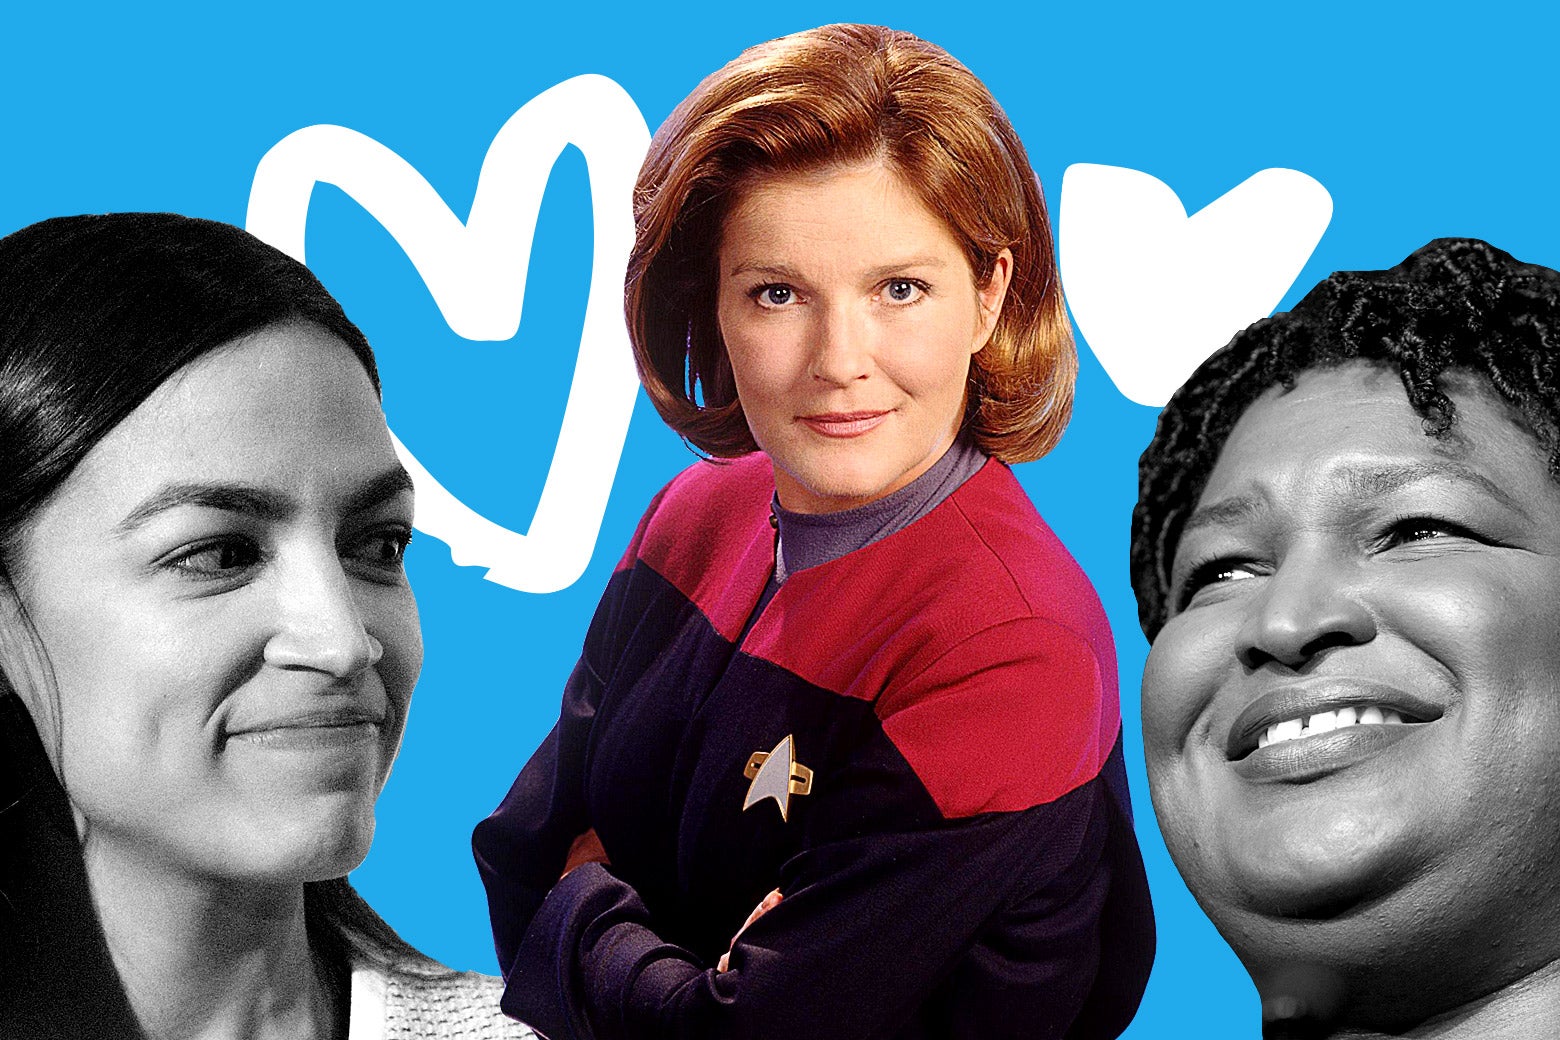 A collage of photos of Alexandria Ocasio-Cortez, Kate Mulgrew as Capt. Janeway, and Stacey Abrams with hearts.